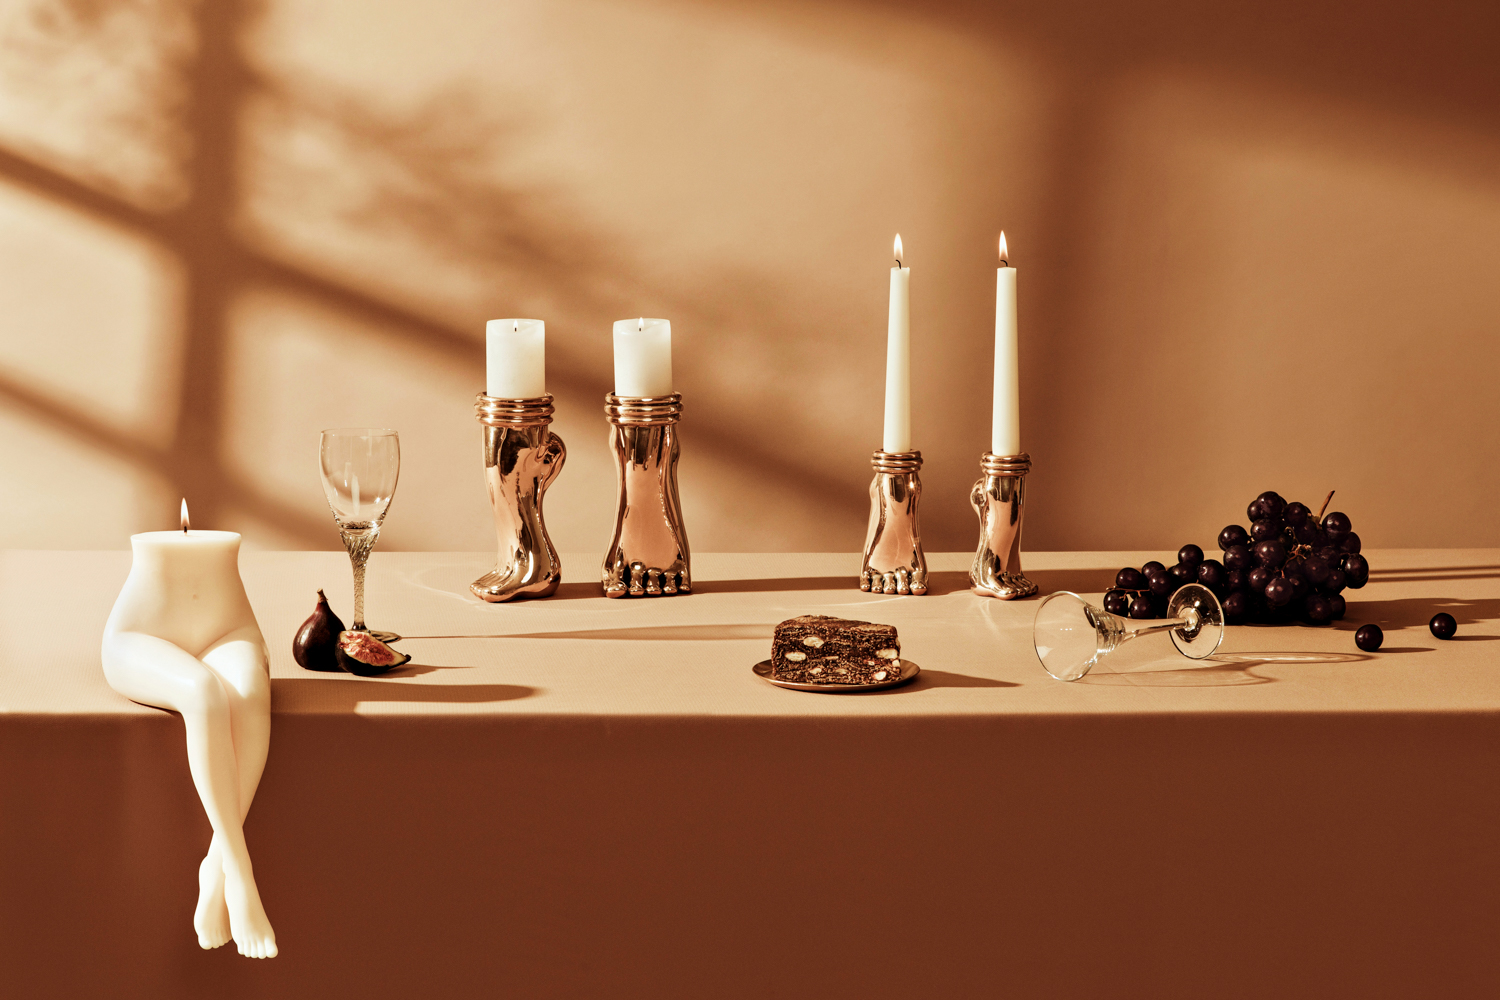 Candle shaped like a woman's crossed legs and four candleholders shaped like feet amongst other decor items